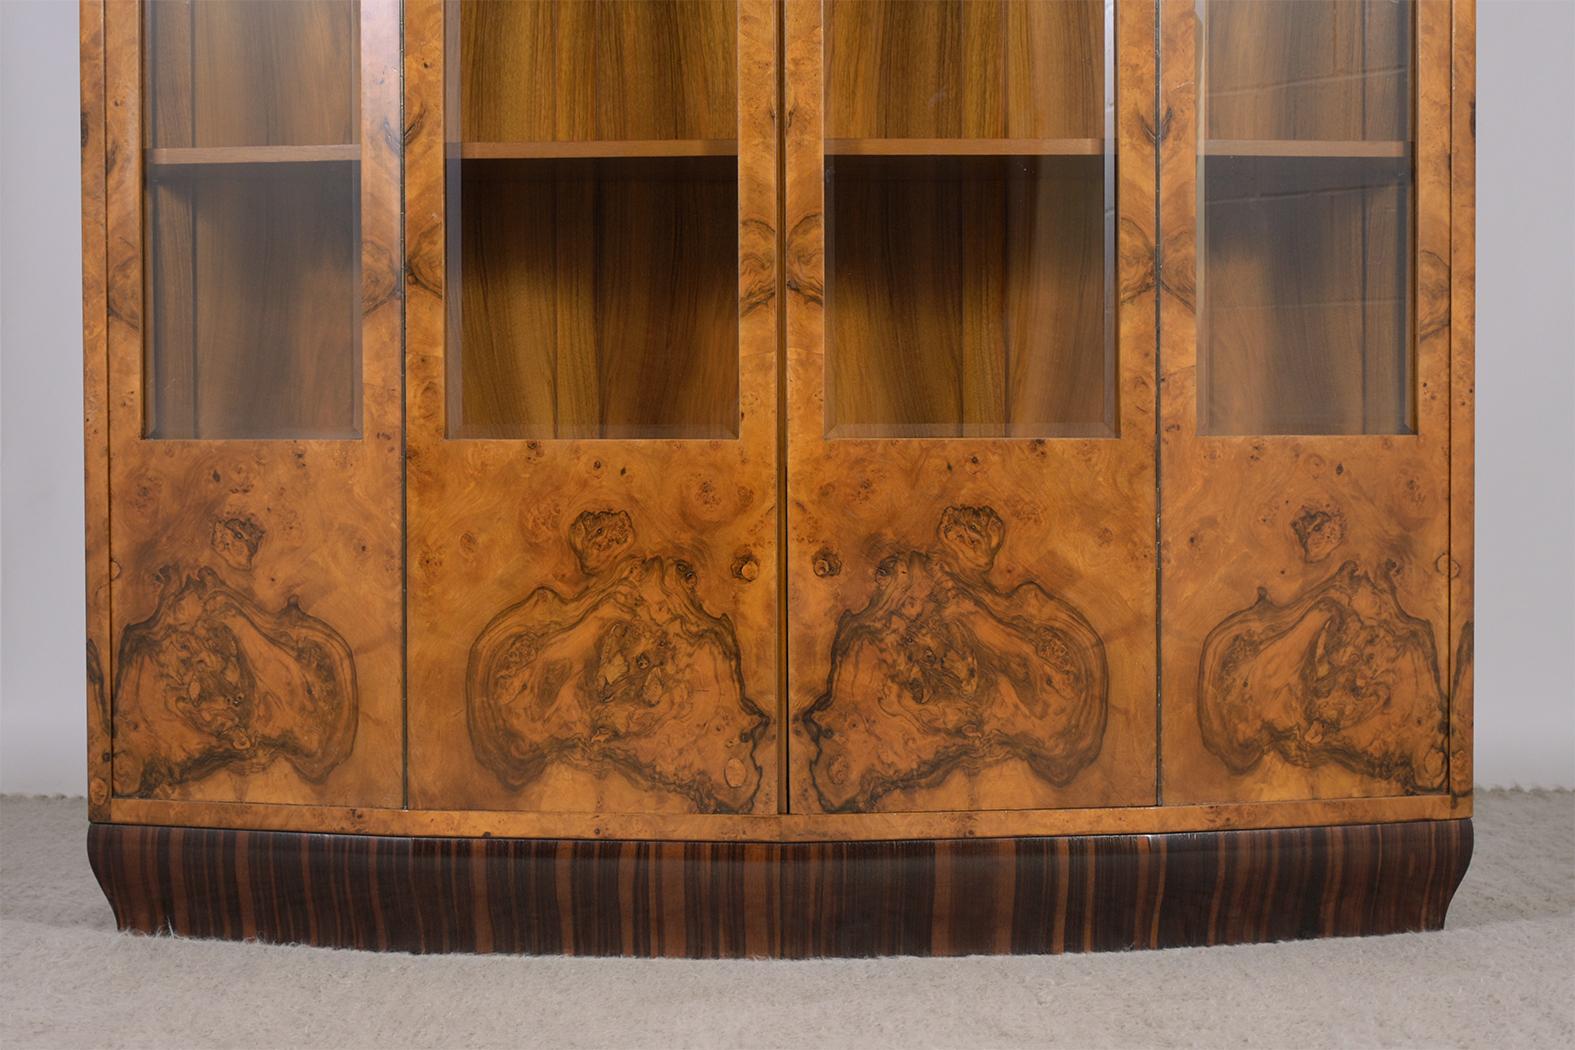 An extraordinary french art-deco bookcase in great condition and fully restored by our expert craftsmen team. This vitrine is beautifully crafted out of solid wood, is completely covered in exotic walnut veneers, and features a light walnut color